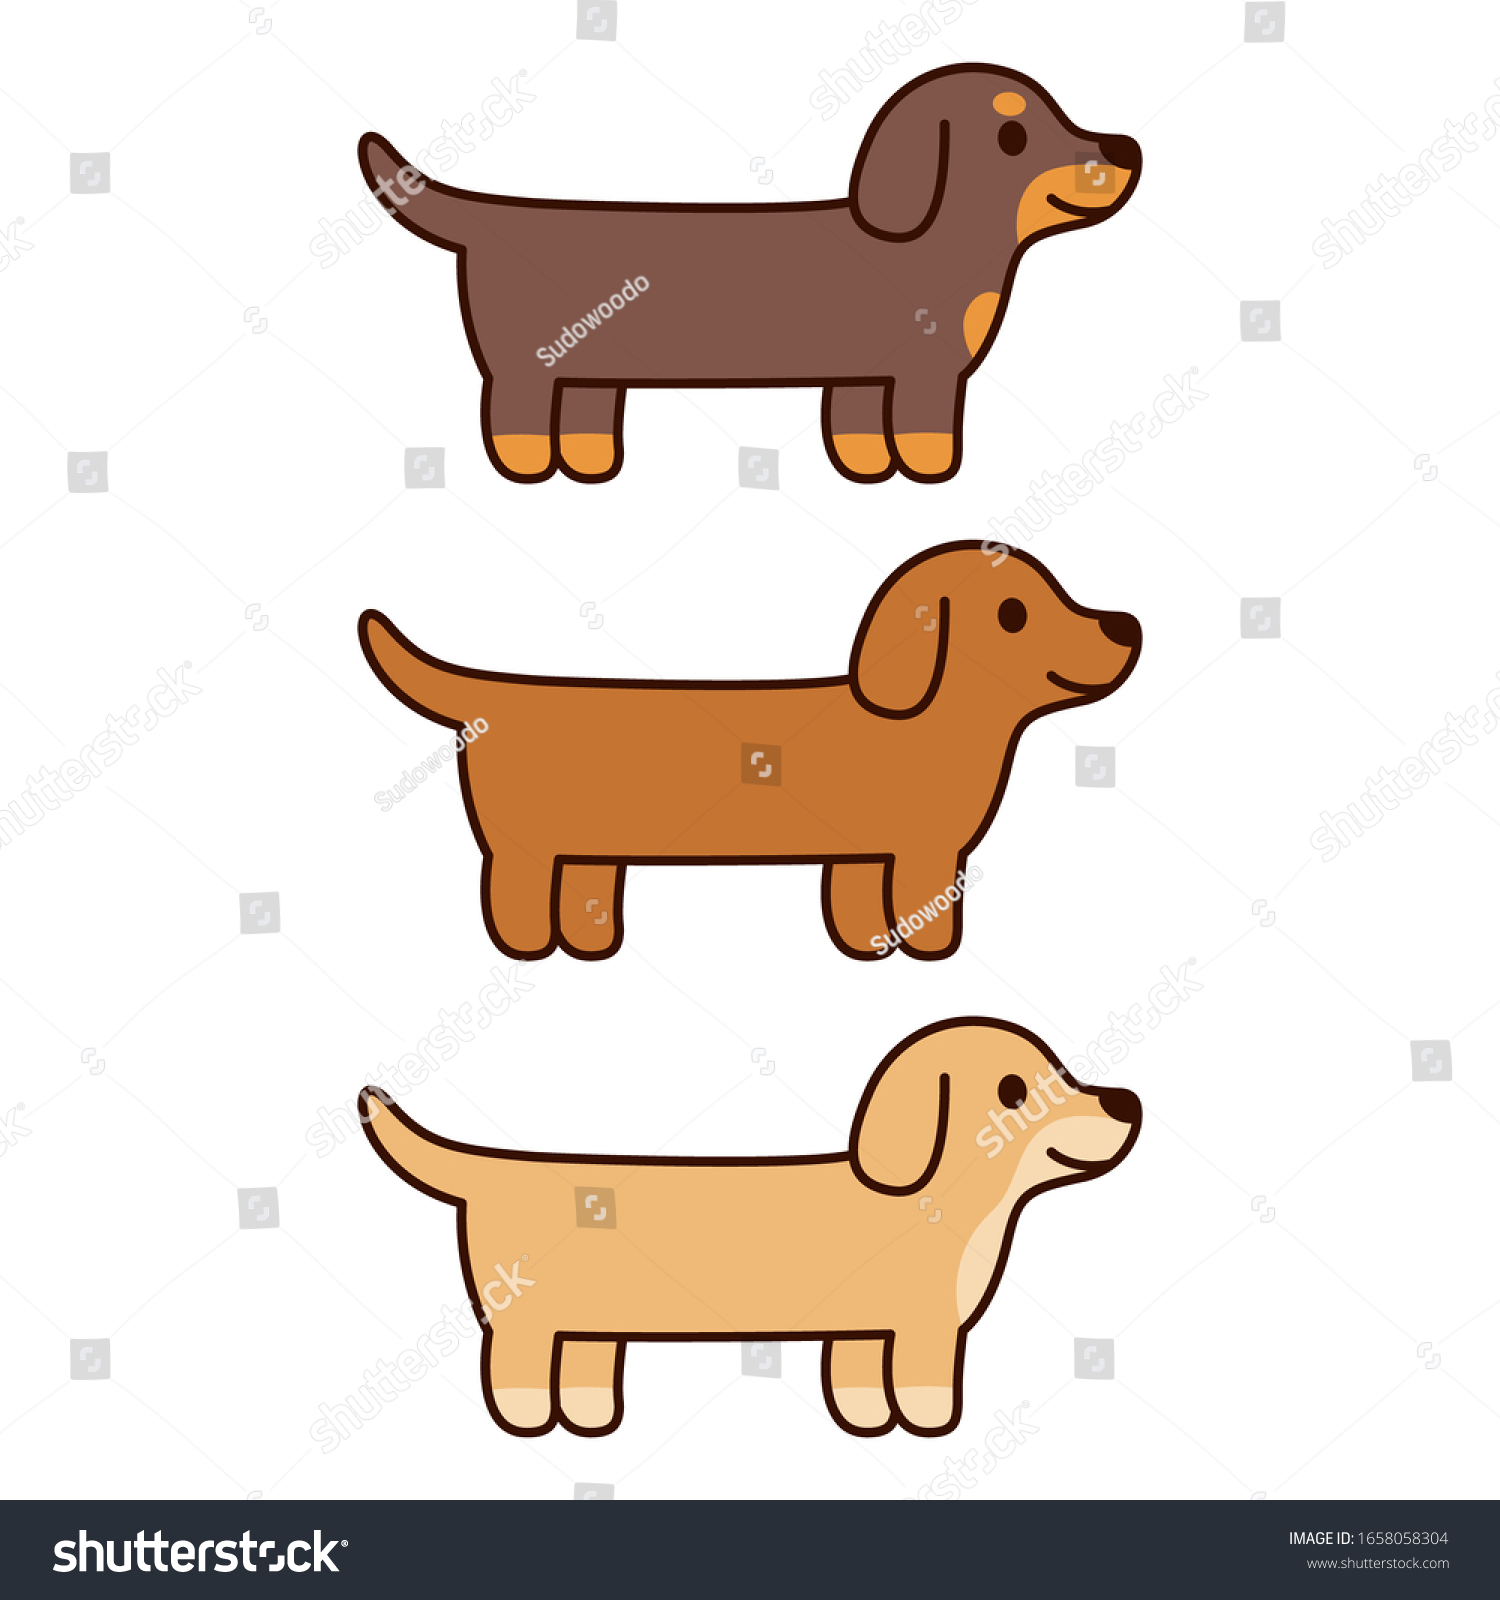 SVG of Three cartoon Dachshunds, black, brown and cream color. Cute and simple dog drawing set, vector clip art illustration. svg